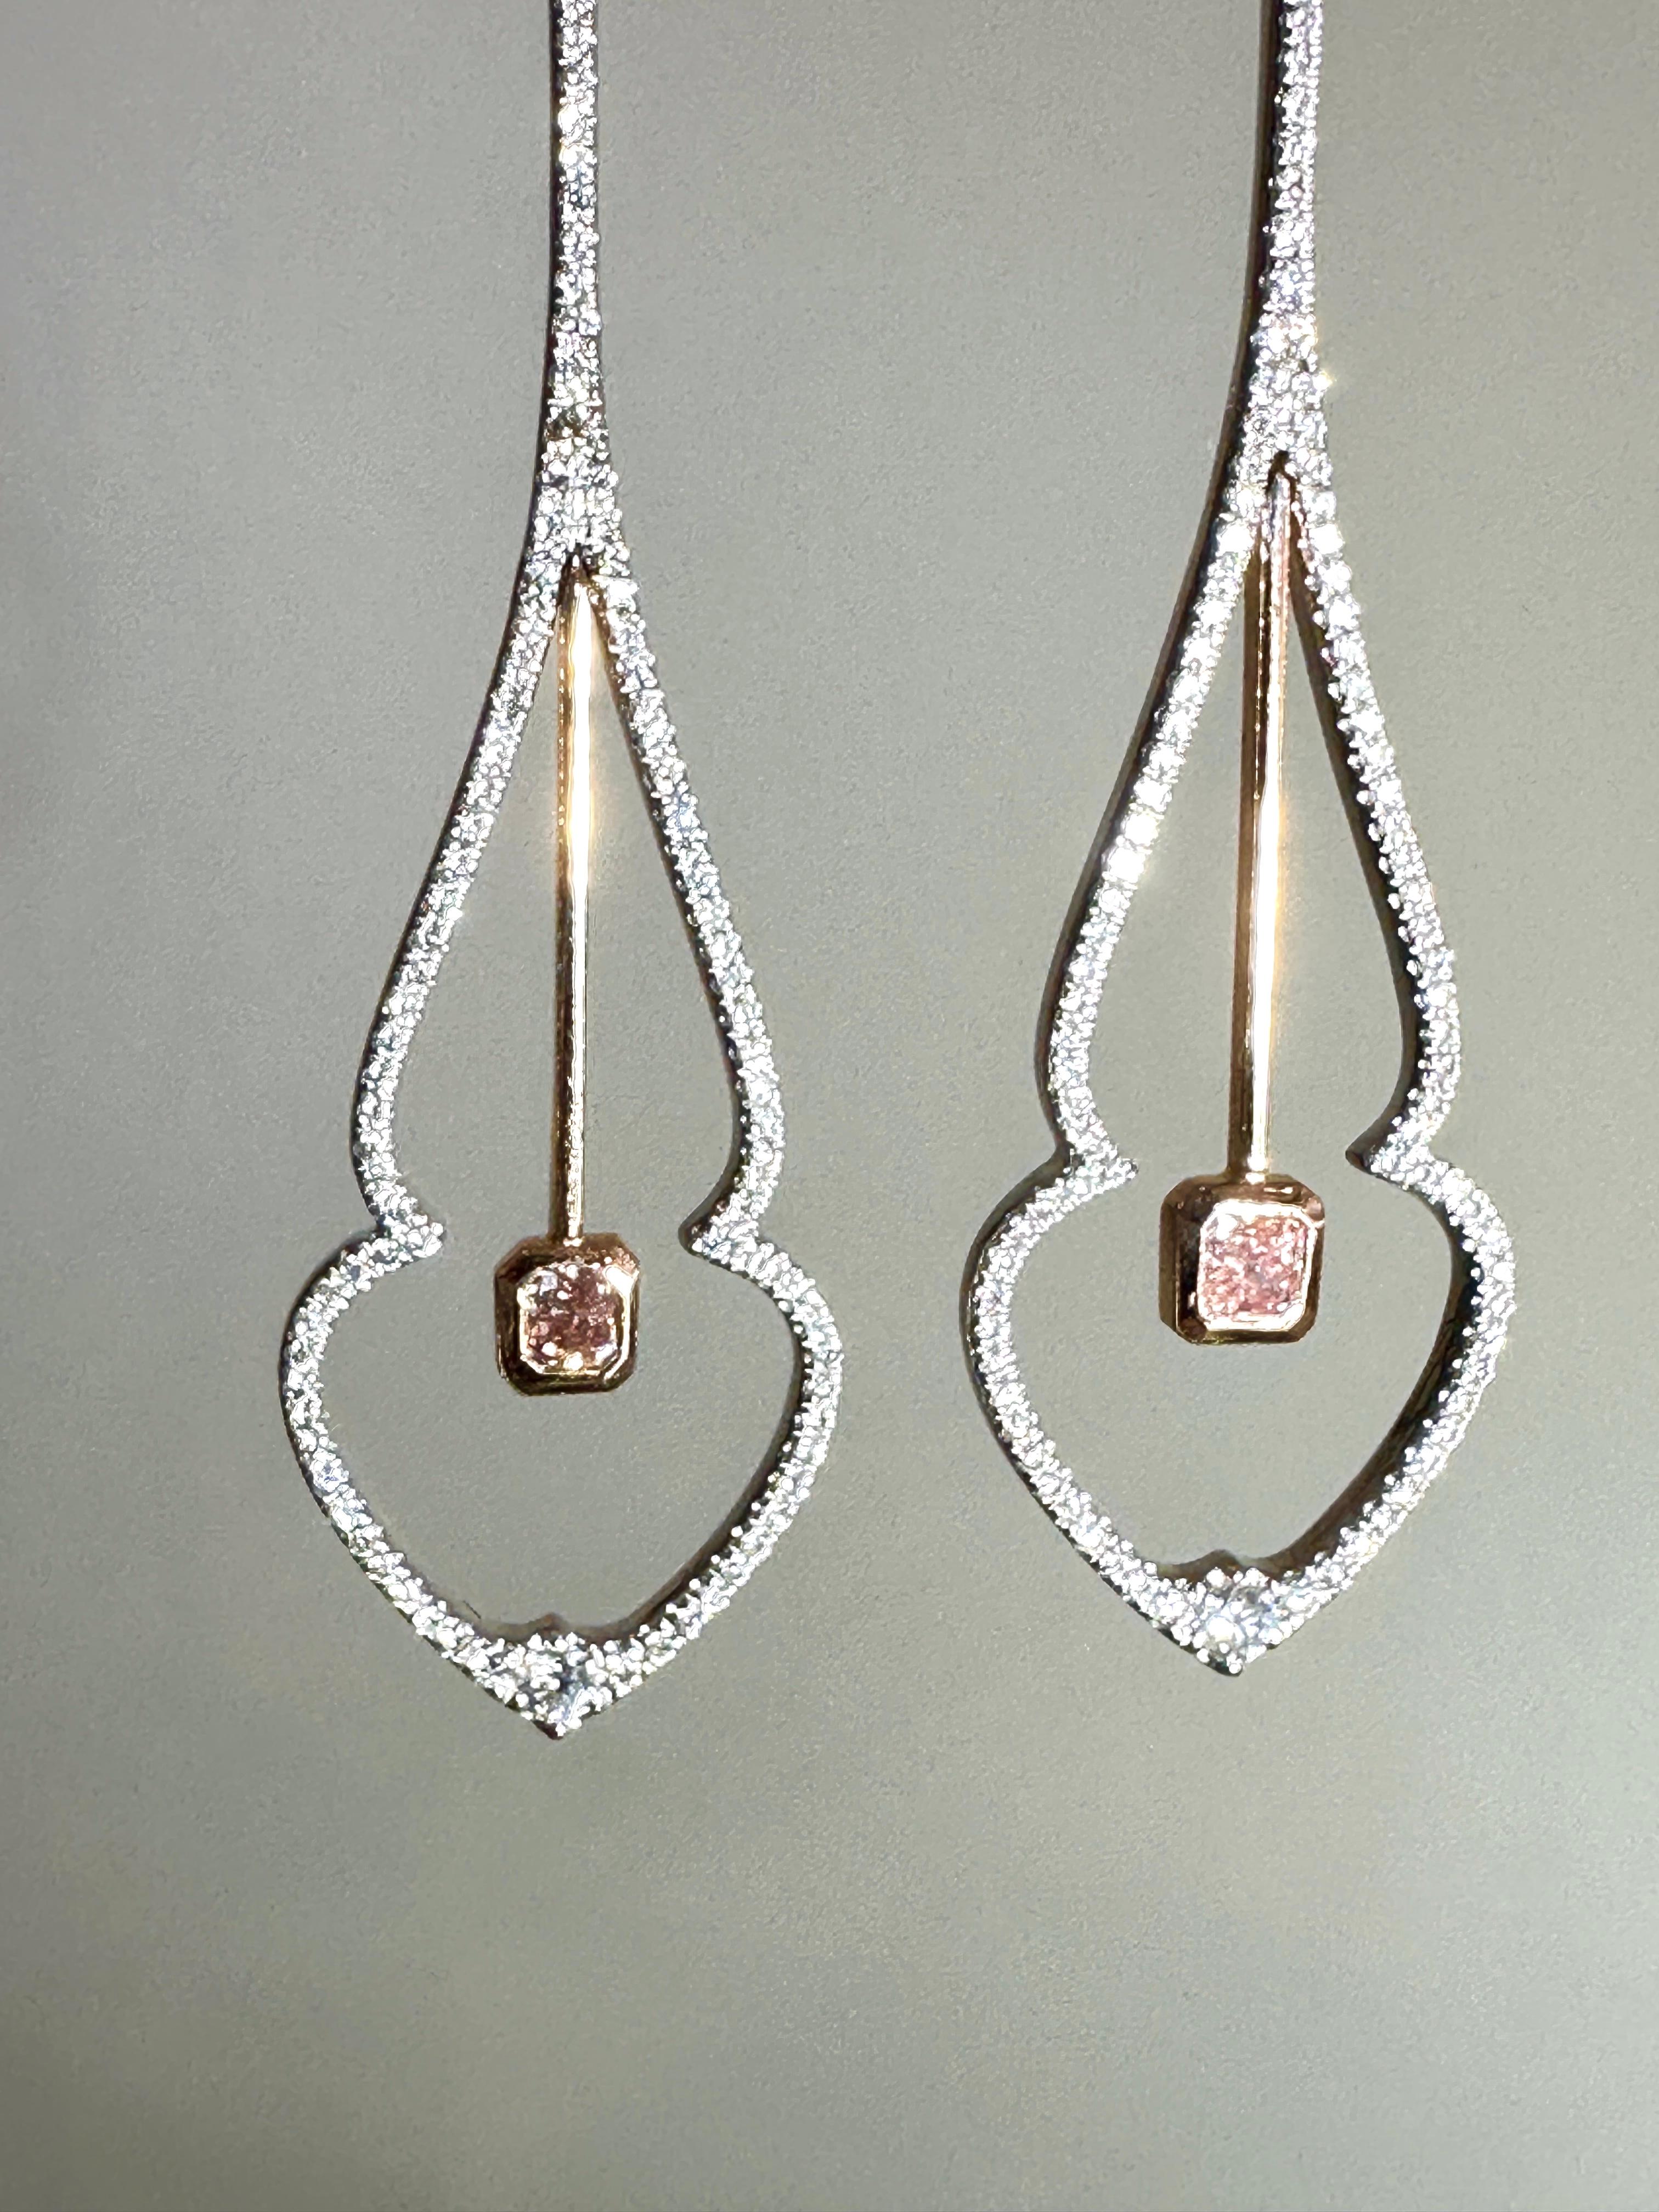 Pink Diamond Drop Earrings 18k White and Rose Gold In New Condition For Sale In Rhinebeck, NY